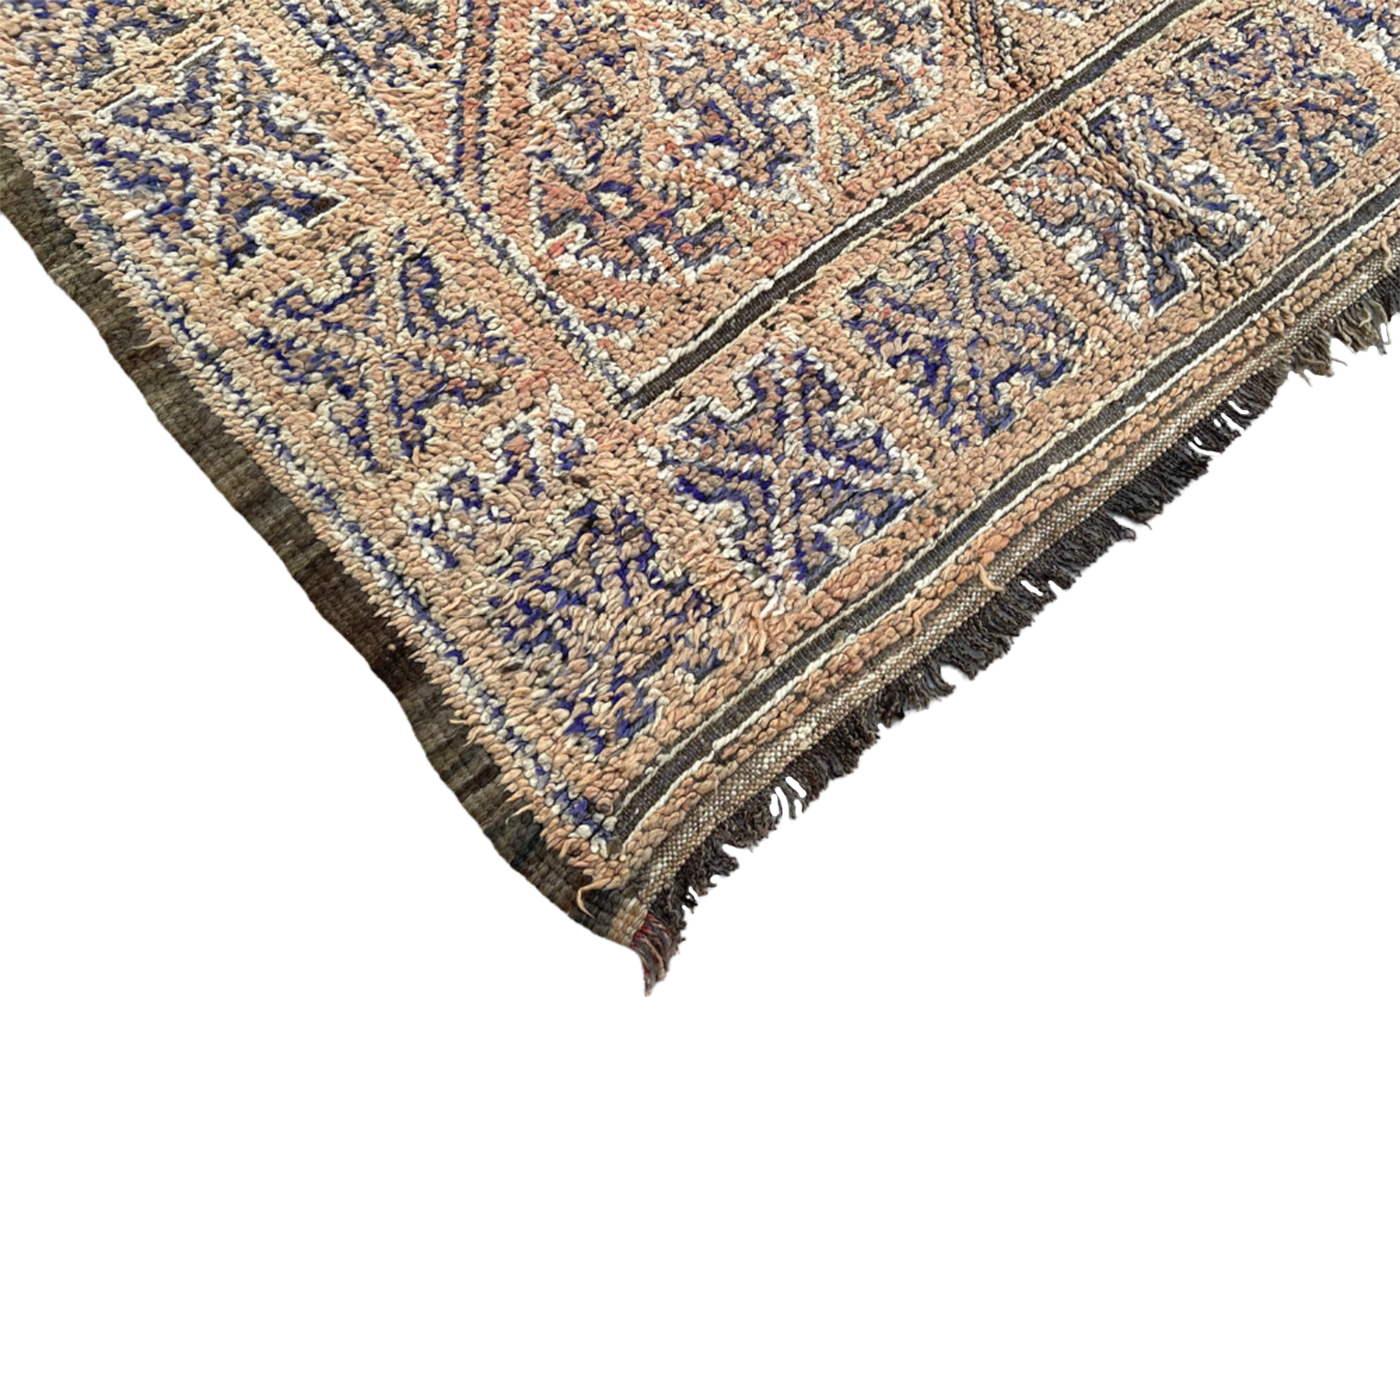 Beni Mguild Moroccan Rugs Review